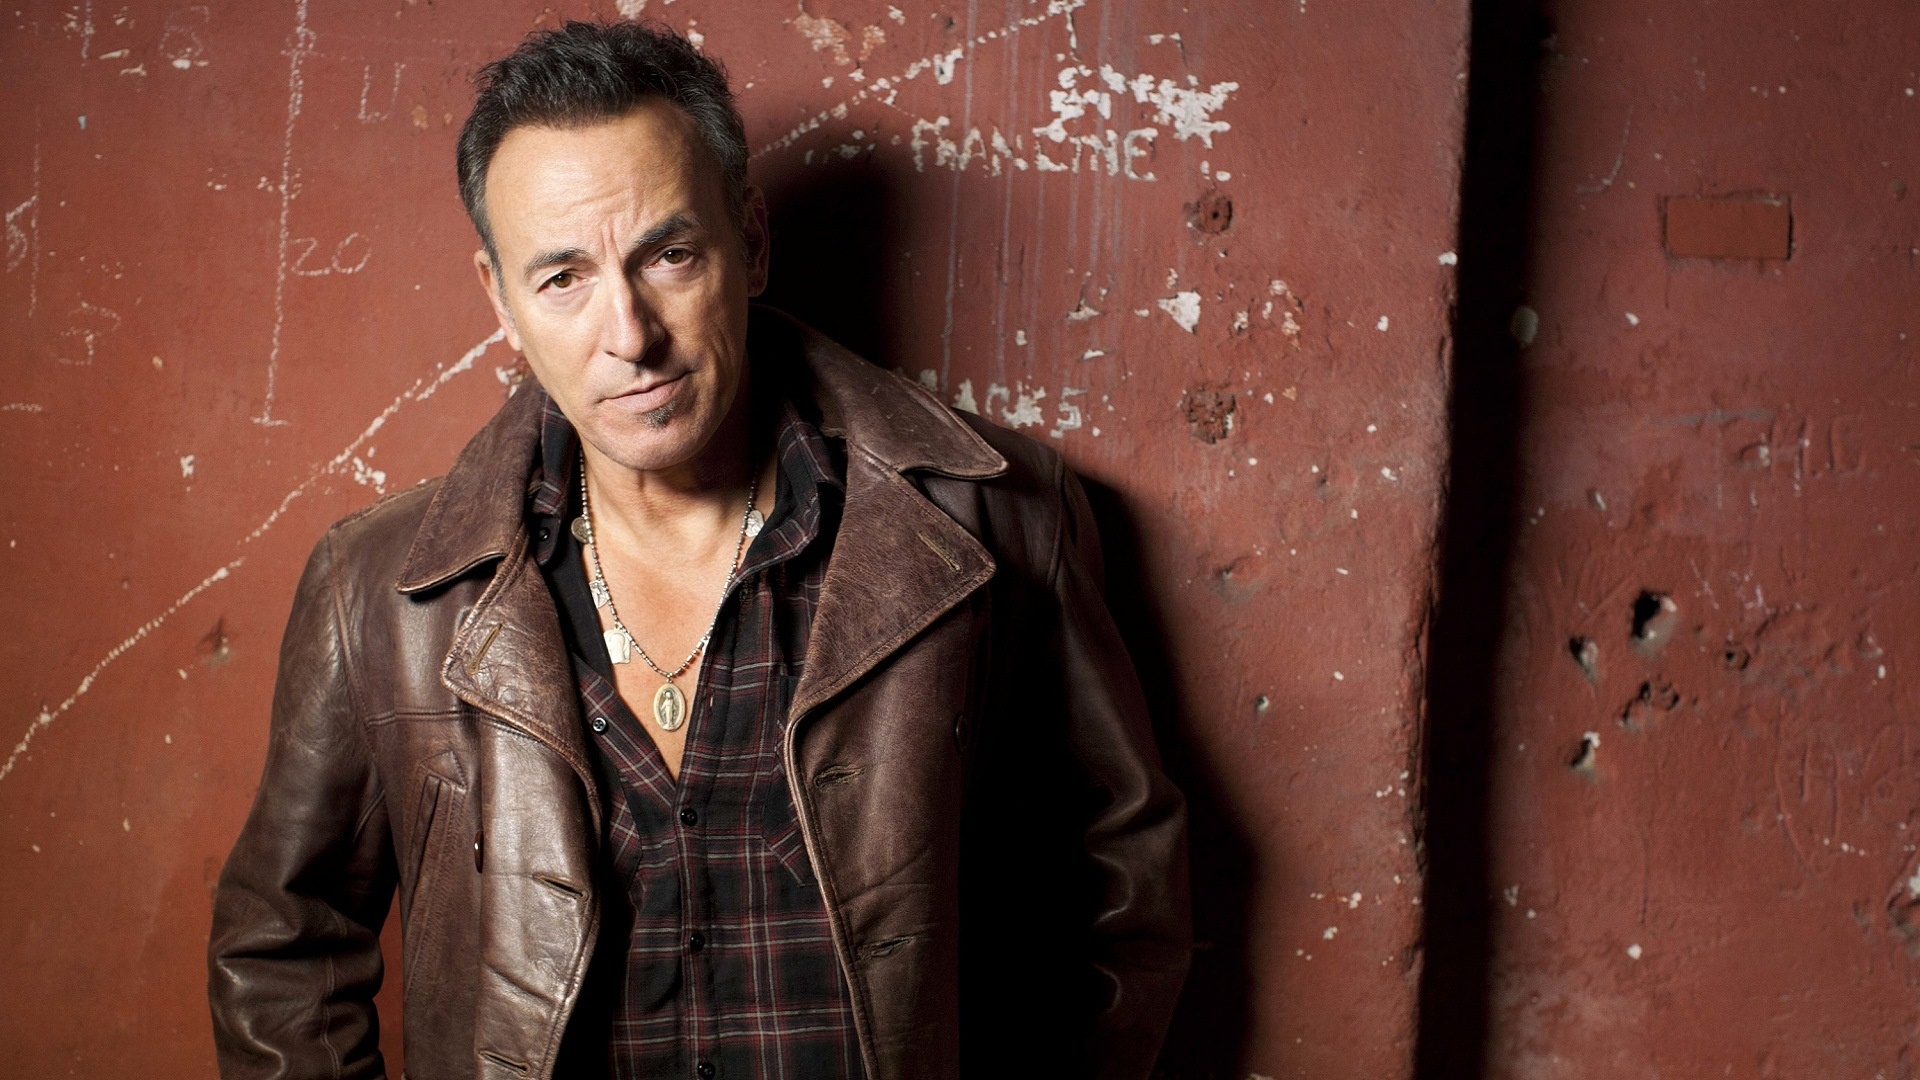 Bruce Springsteen Wallpapers   1920x1080   669135 1920x1080